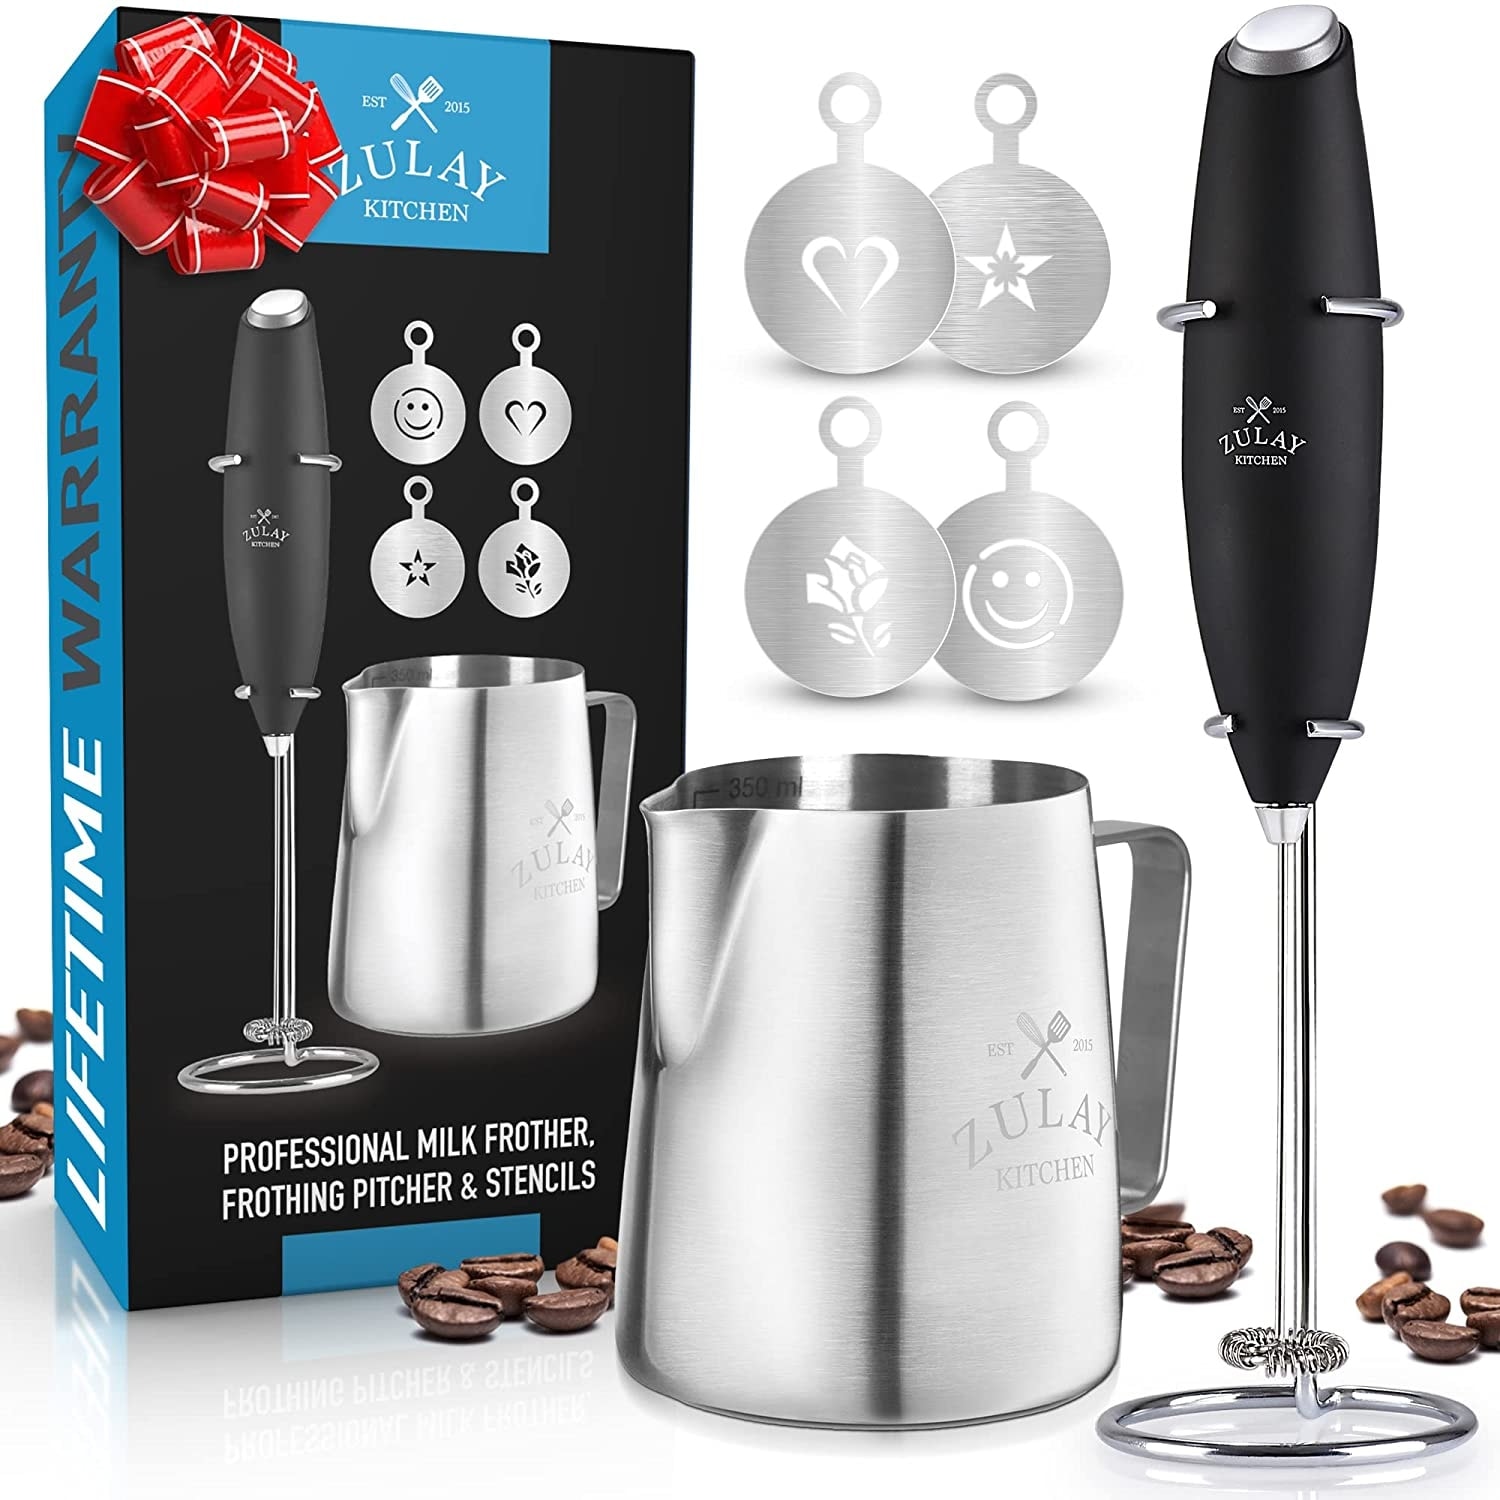 Zulay Kitchen 4-in-1 Automatic Milk Frother For Hot & Cold Milk